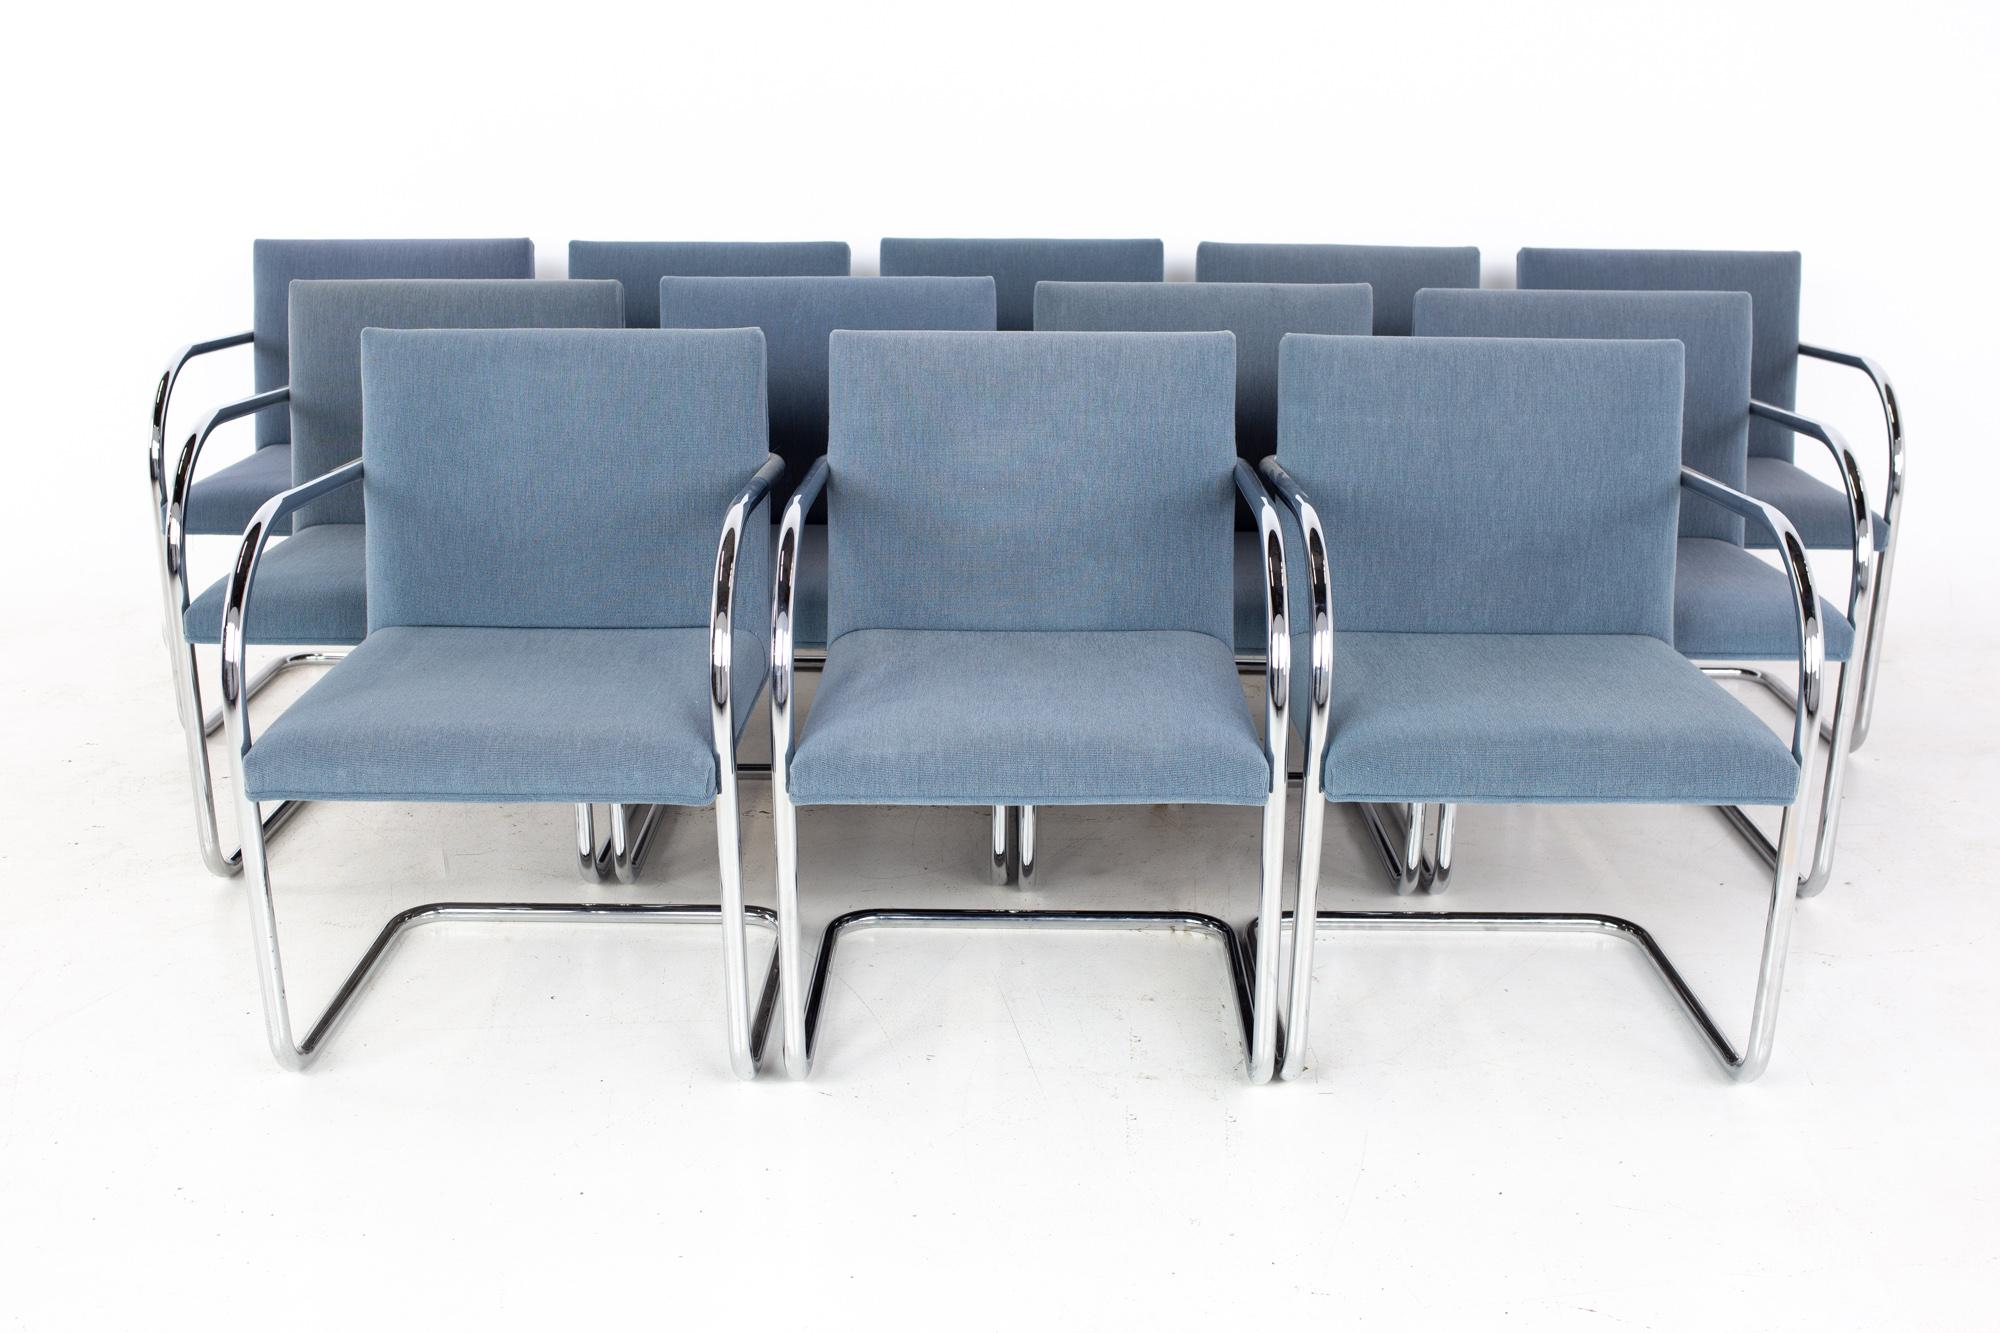 Mies Van Der Rohe for Gordon International BRNO mid century Tubular occasional arm chair - Set of 12
Each chair measures: 21.75 wide x 23 deep x 31.5 high, with a seat height of 18 inches and arm height of 26 inches

All pieces of furniture can